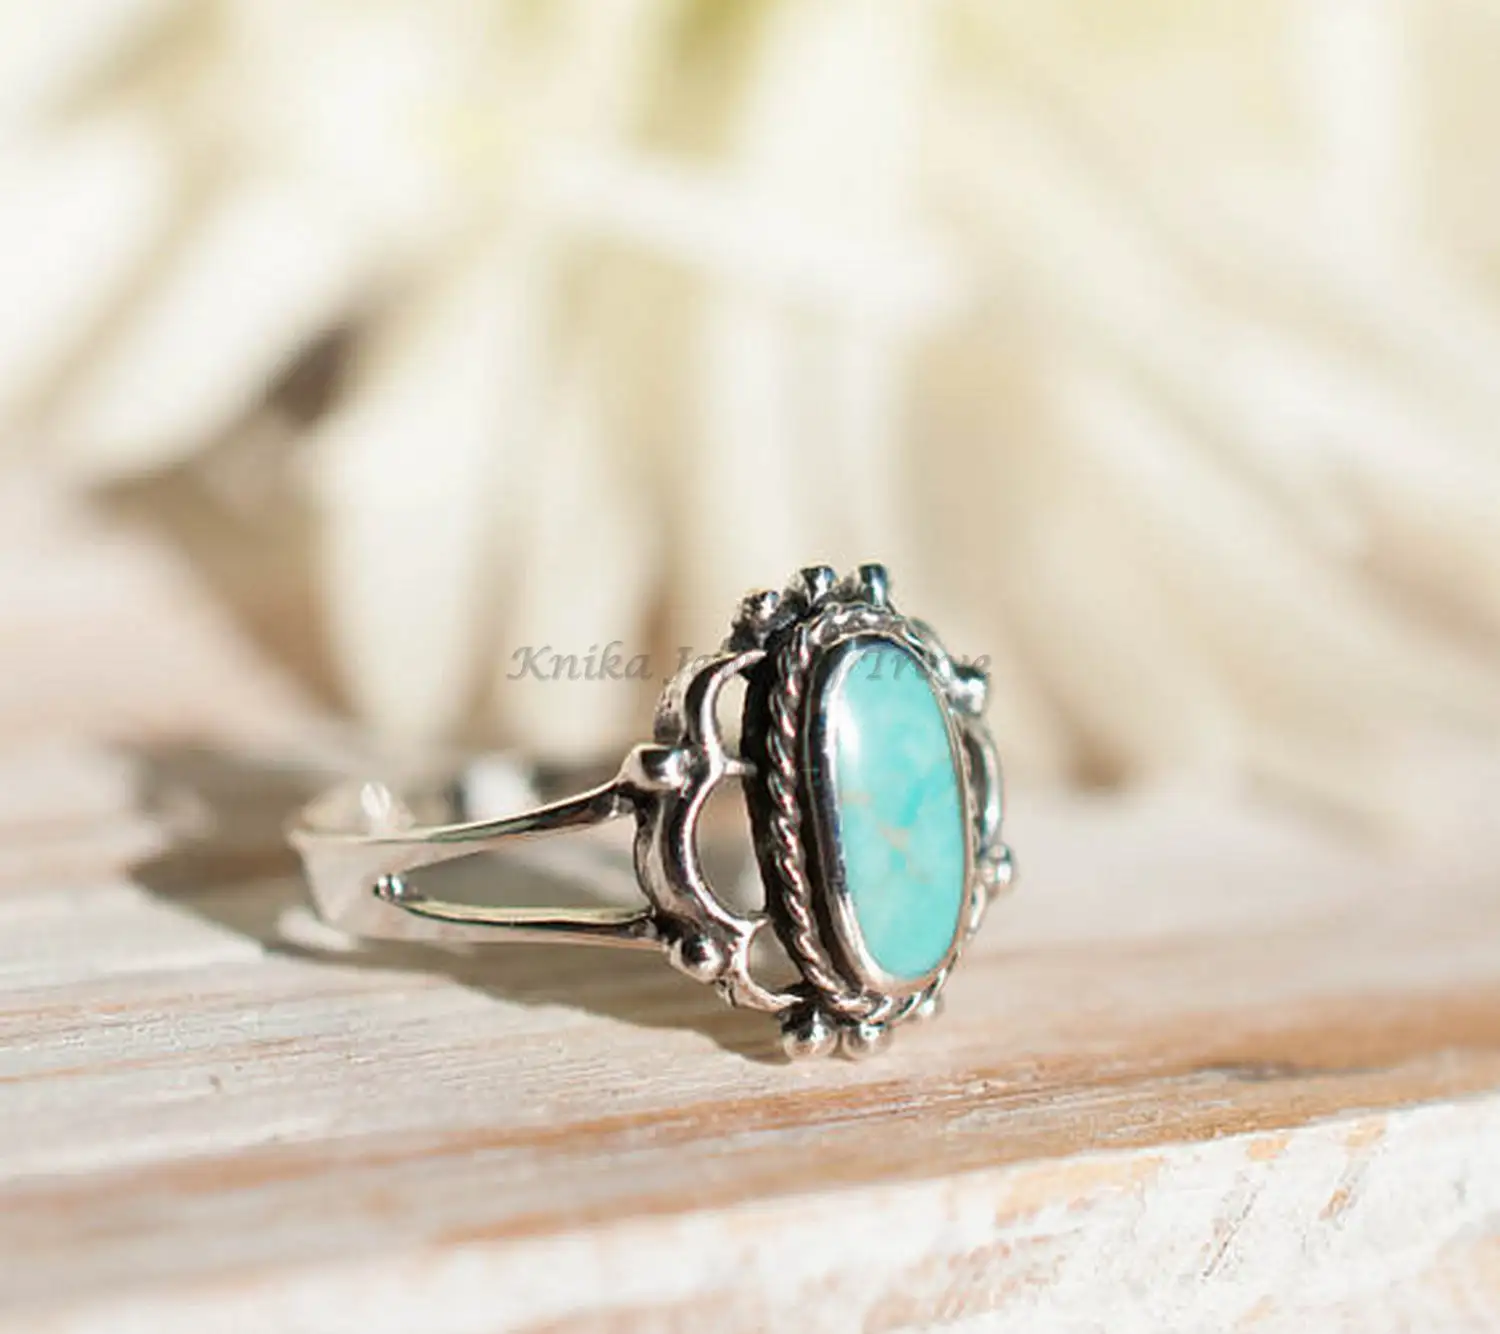 Republic Larimar Gemstone Ring 925 Solid Sterling Silver Ring Natural Larimar Cabochon Stone Silver Statement Ring for Women